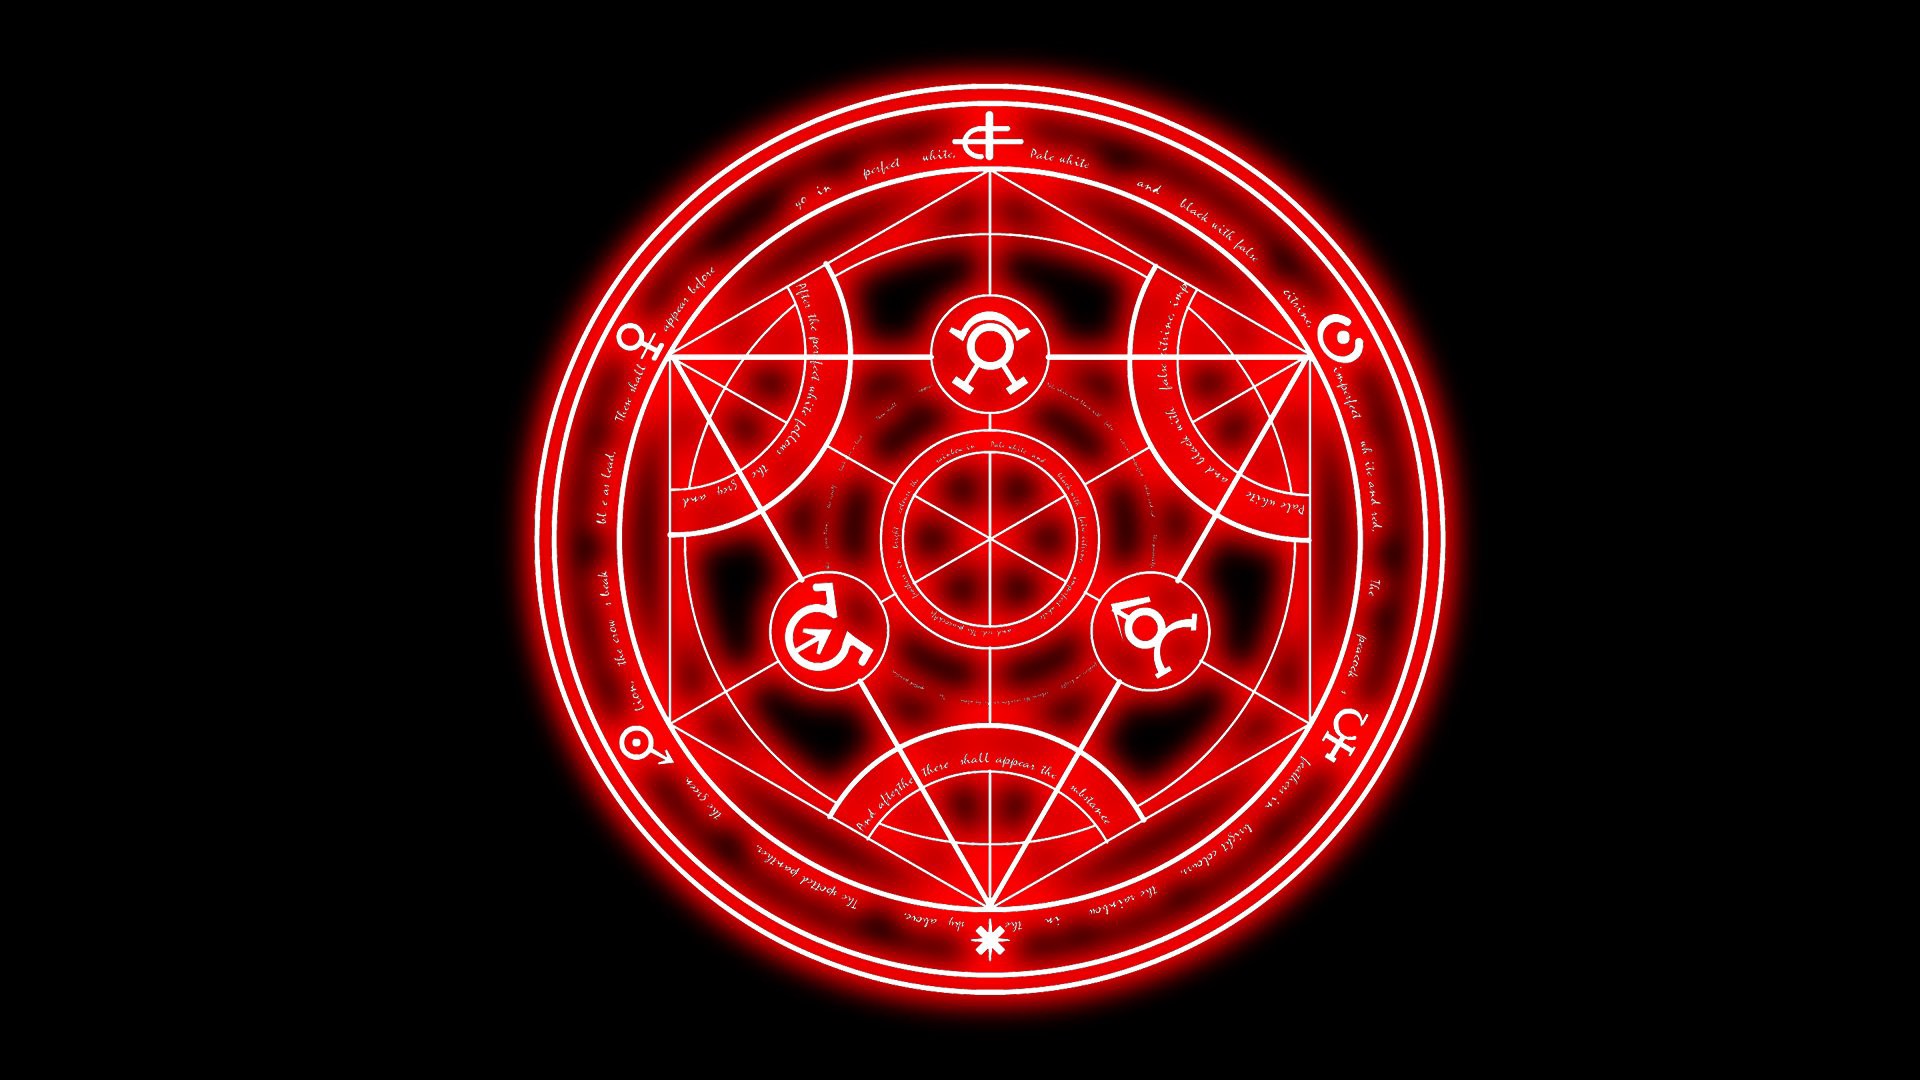 The Real Meaning Of The Truth In Fullmetal Alchemist: Brotherhood